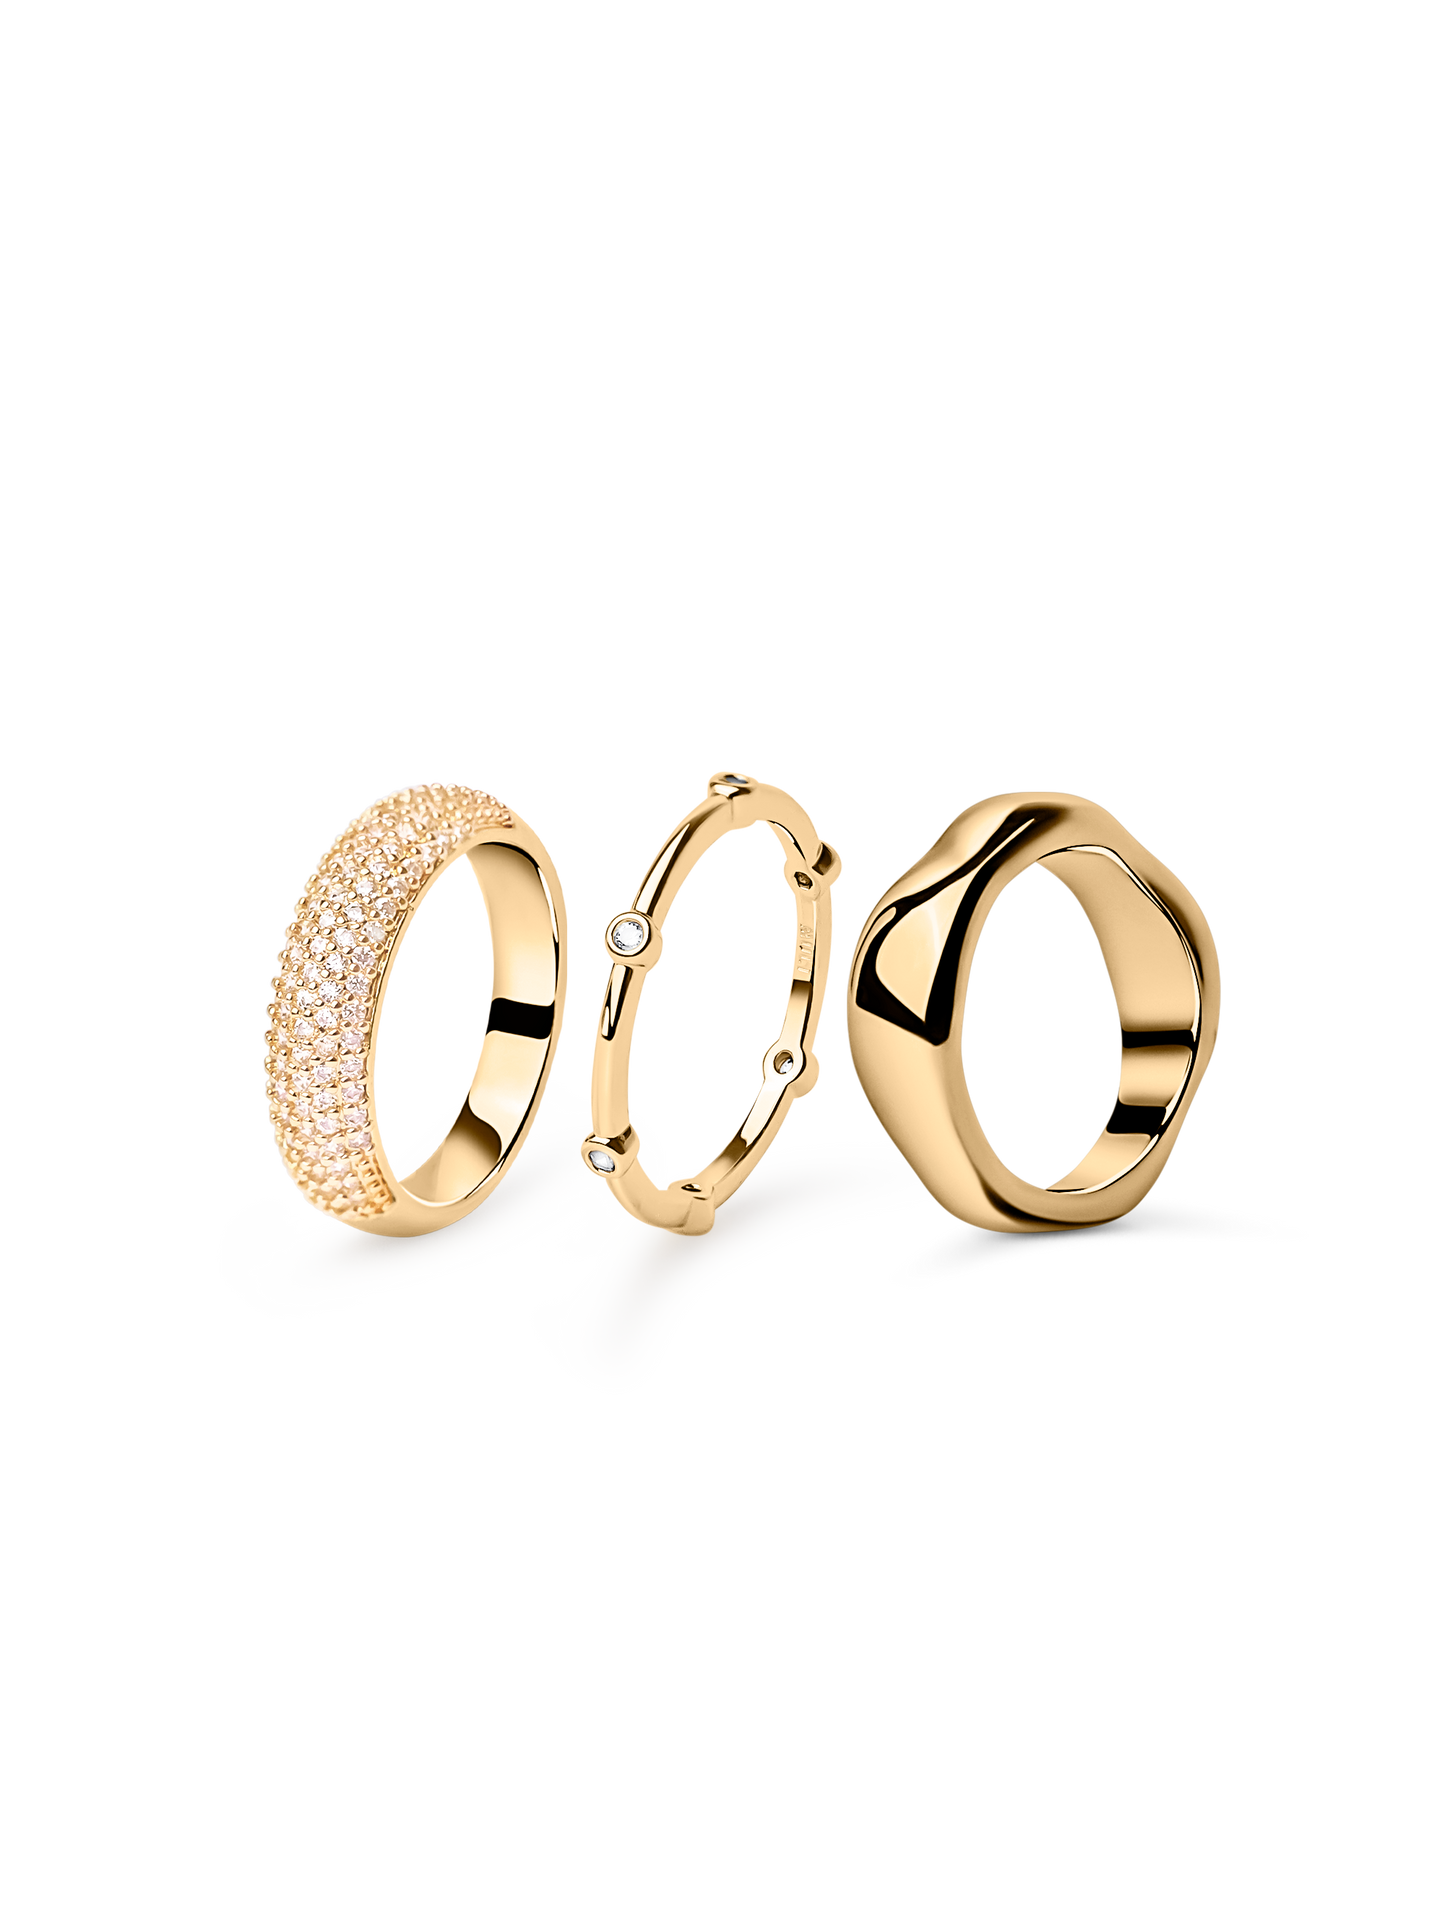 Pave Dome Ring, Thin Milgrain Ring and Wavy Ring by You gold